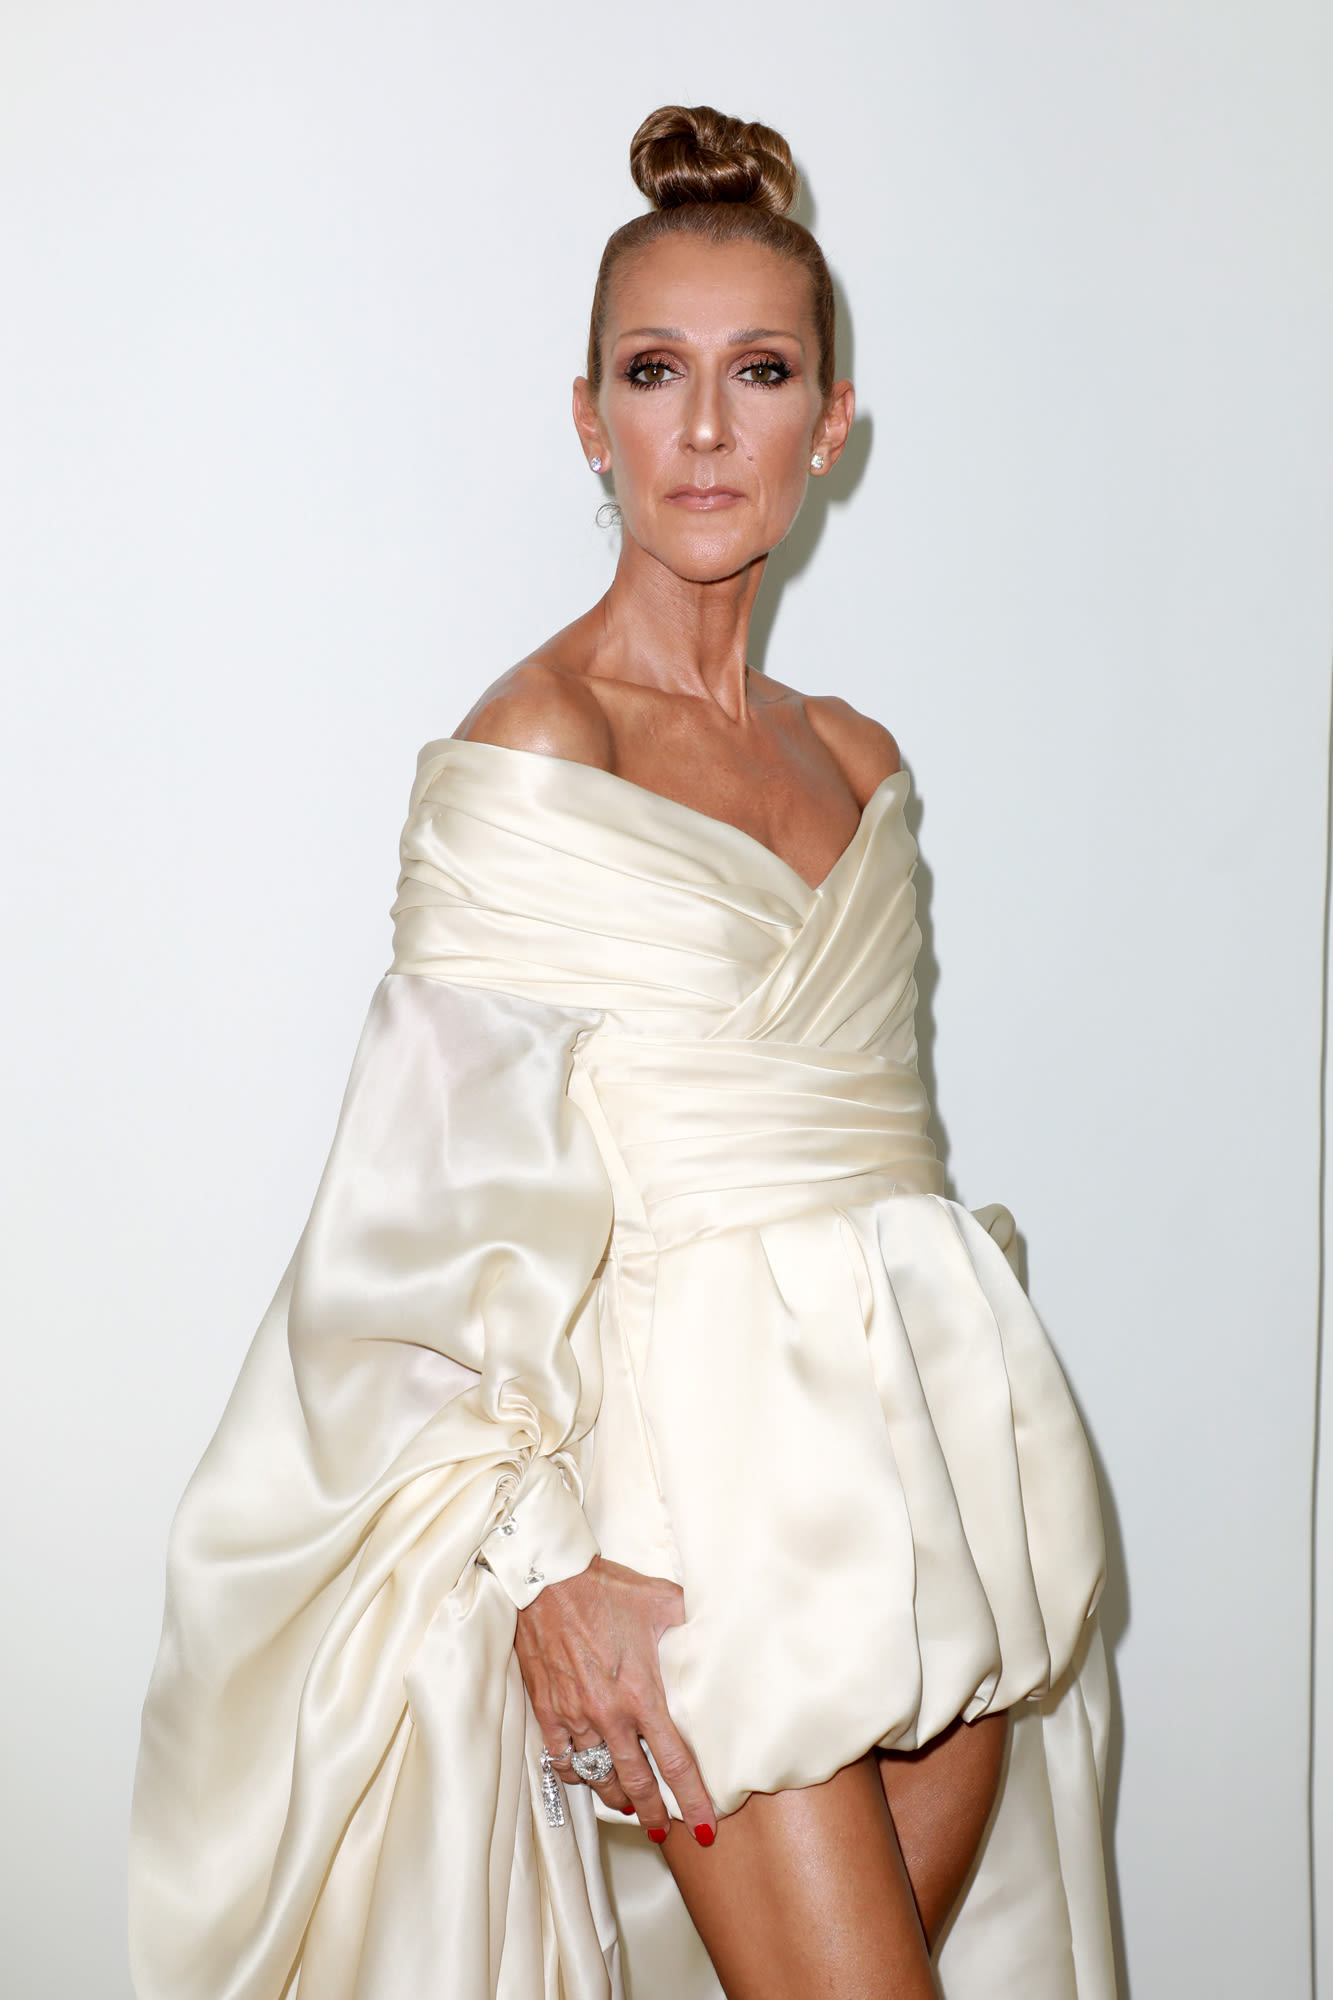 Celine Dion’s Documentary About Stiff Person Syndrome Battle: What to Know